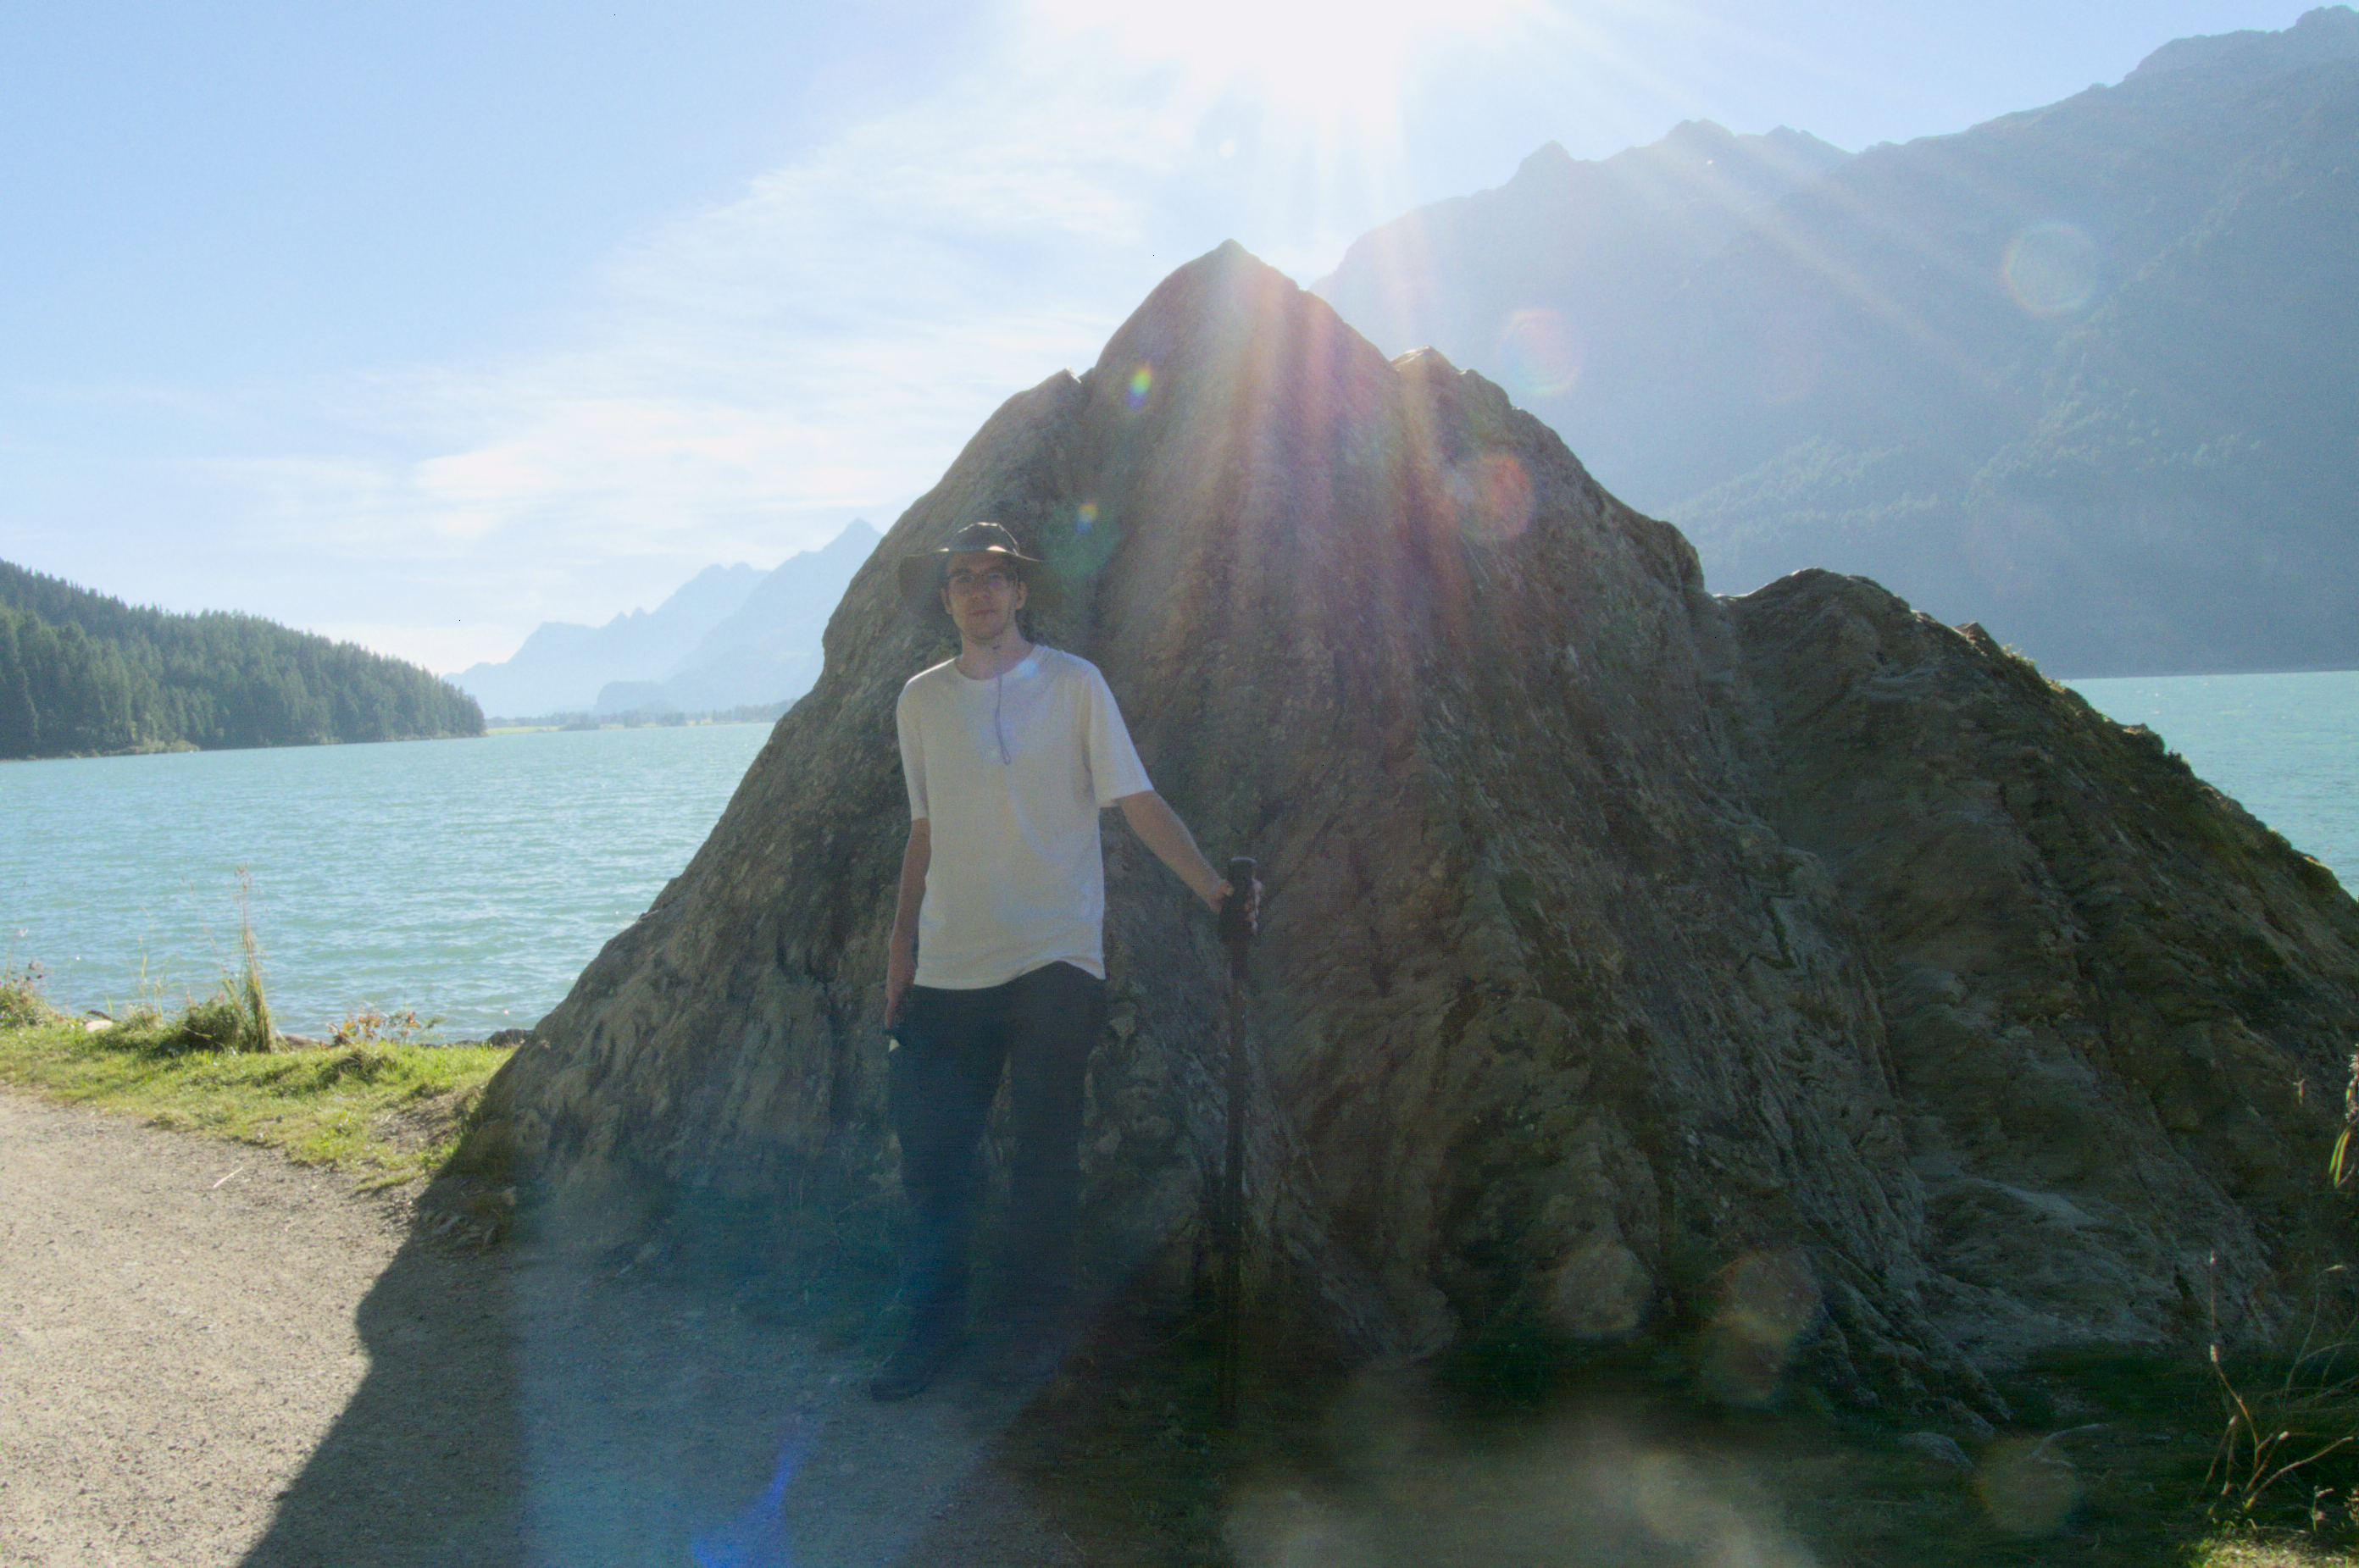 Robin Wils standing in front of the Nietzsche Stein. Blue water is behind the stone with two separate mountains.